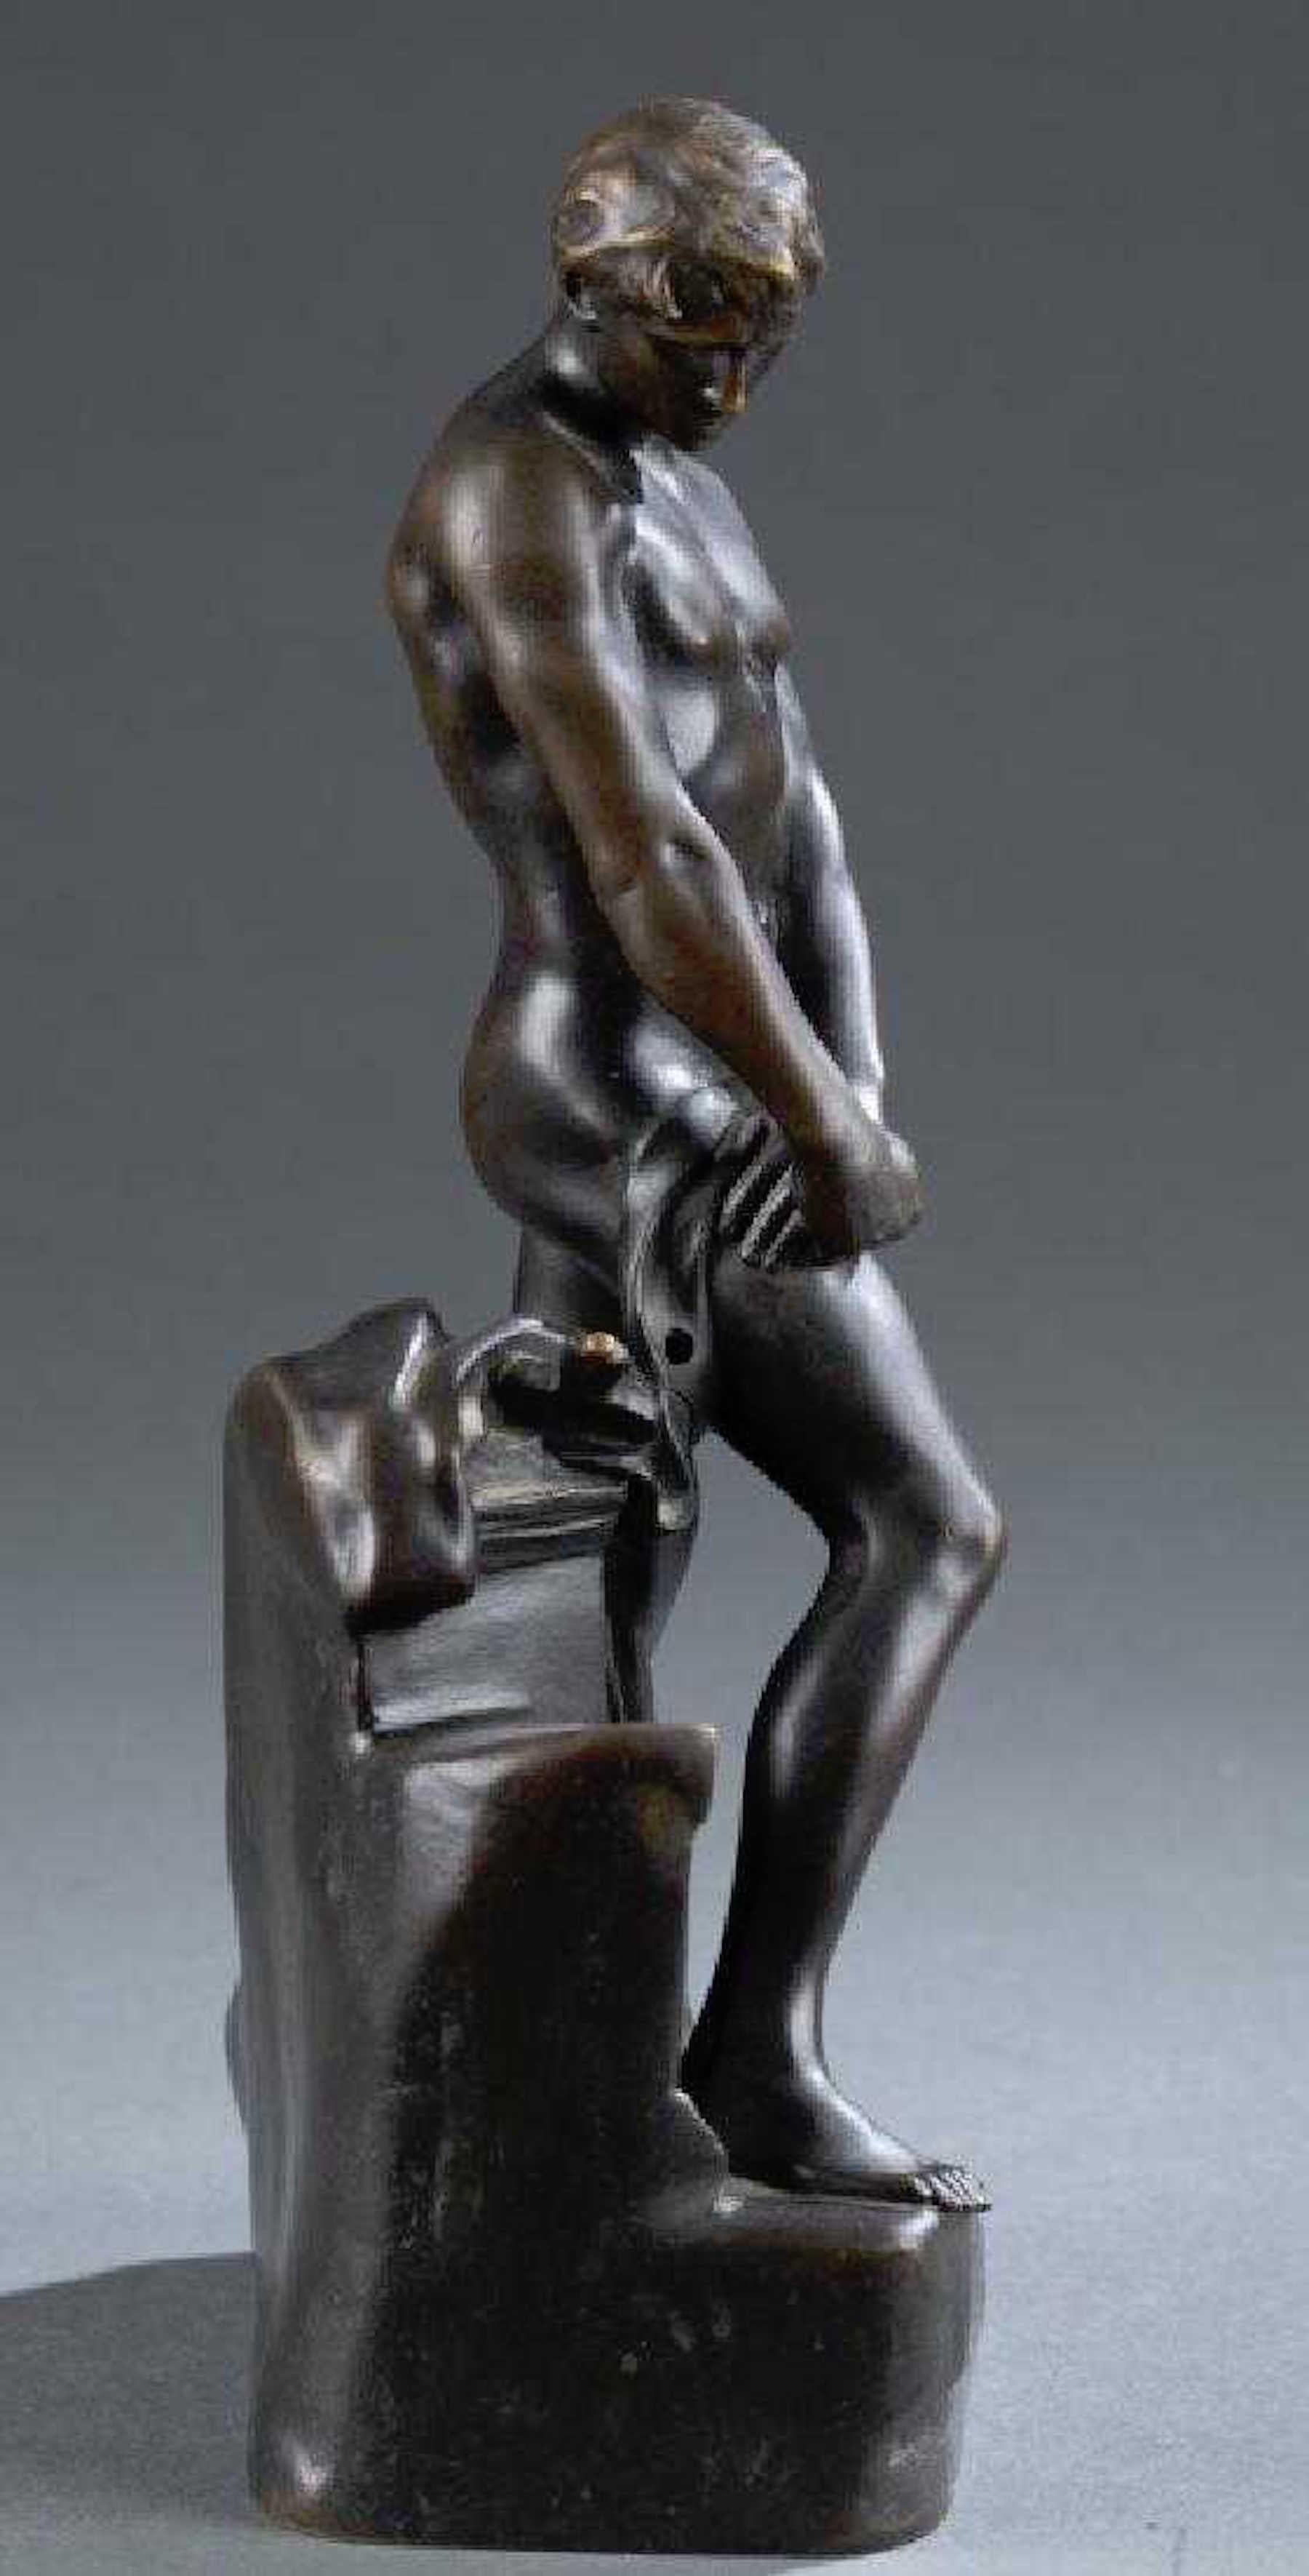 Bronze of a draped male nude athlete by Raoul Francois Larche (French, 1860-1912) 
Signed on base 